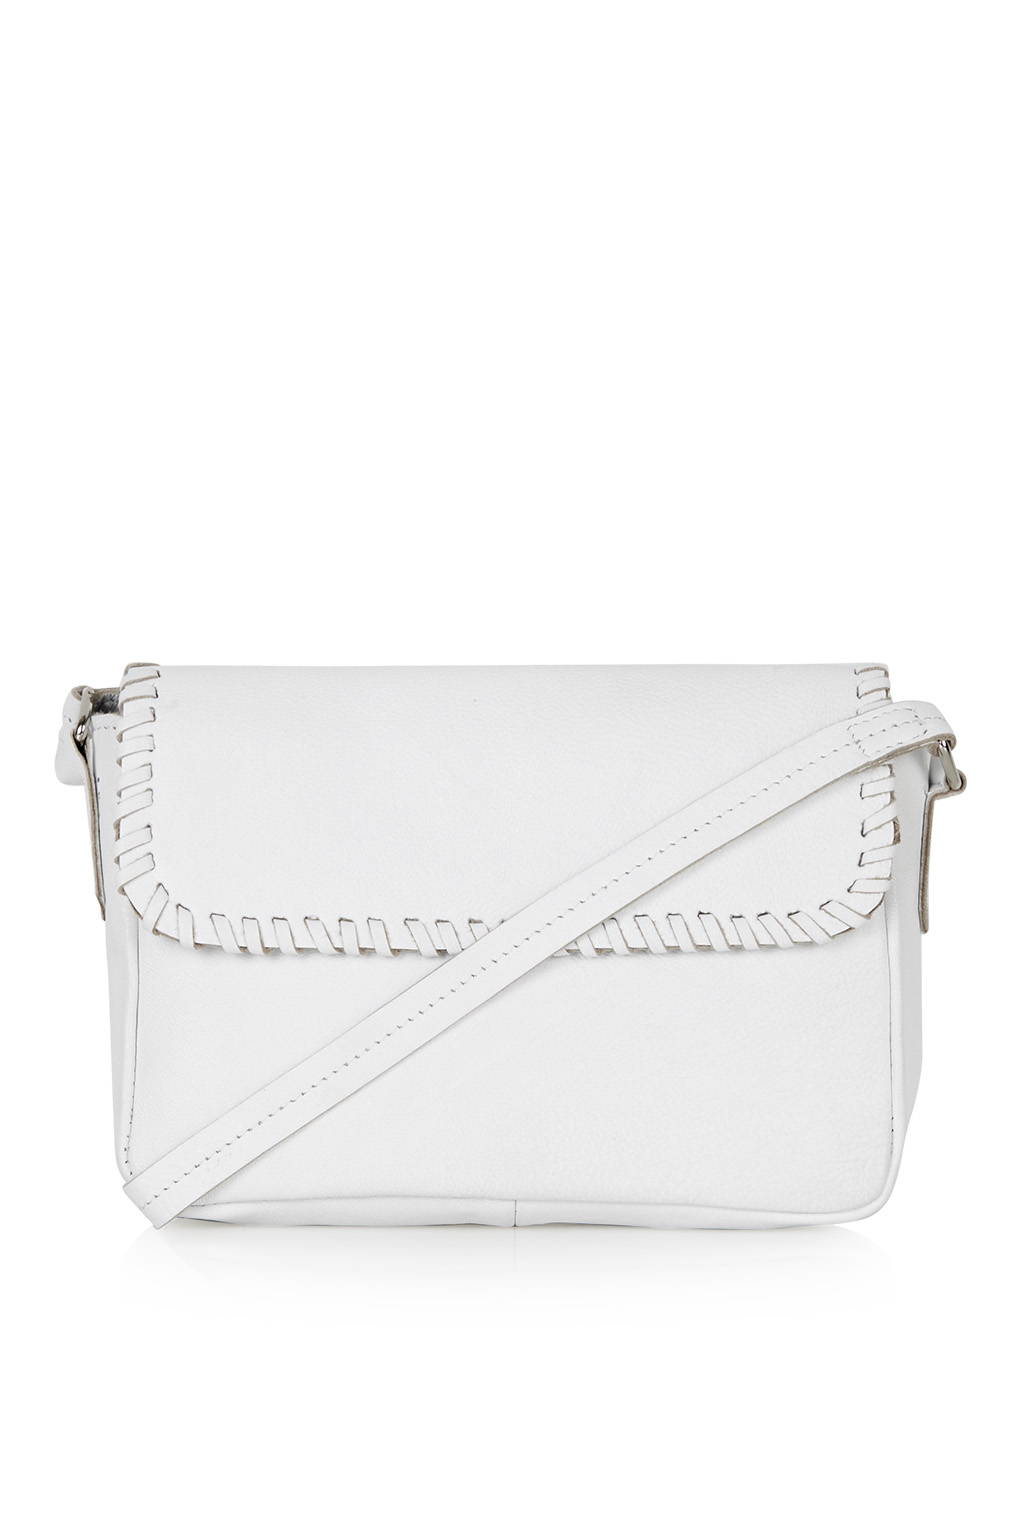 Topshop Mini Leather Crossbody Bag in White | Lyst